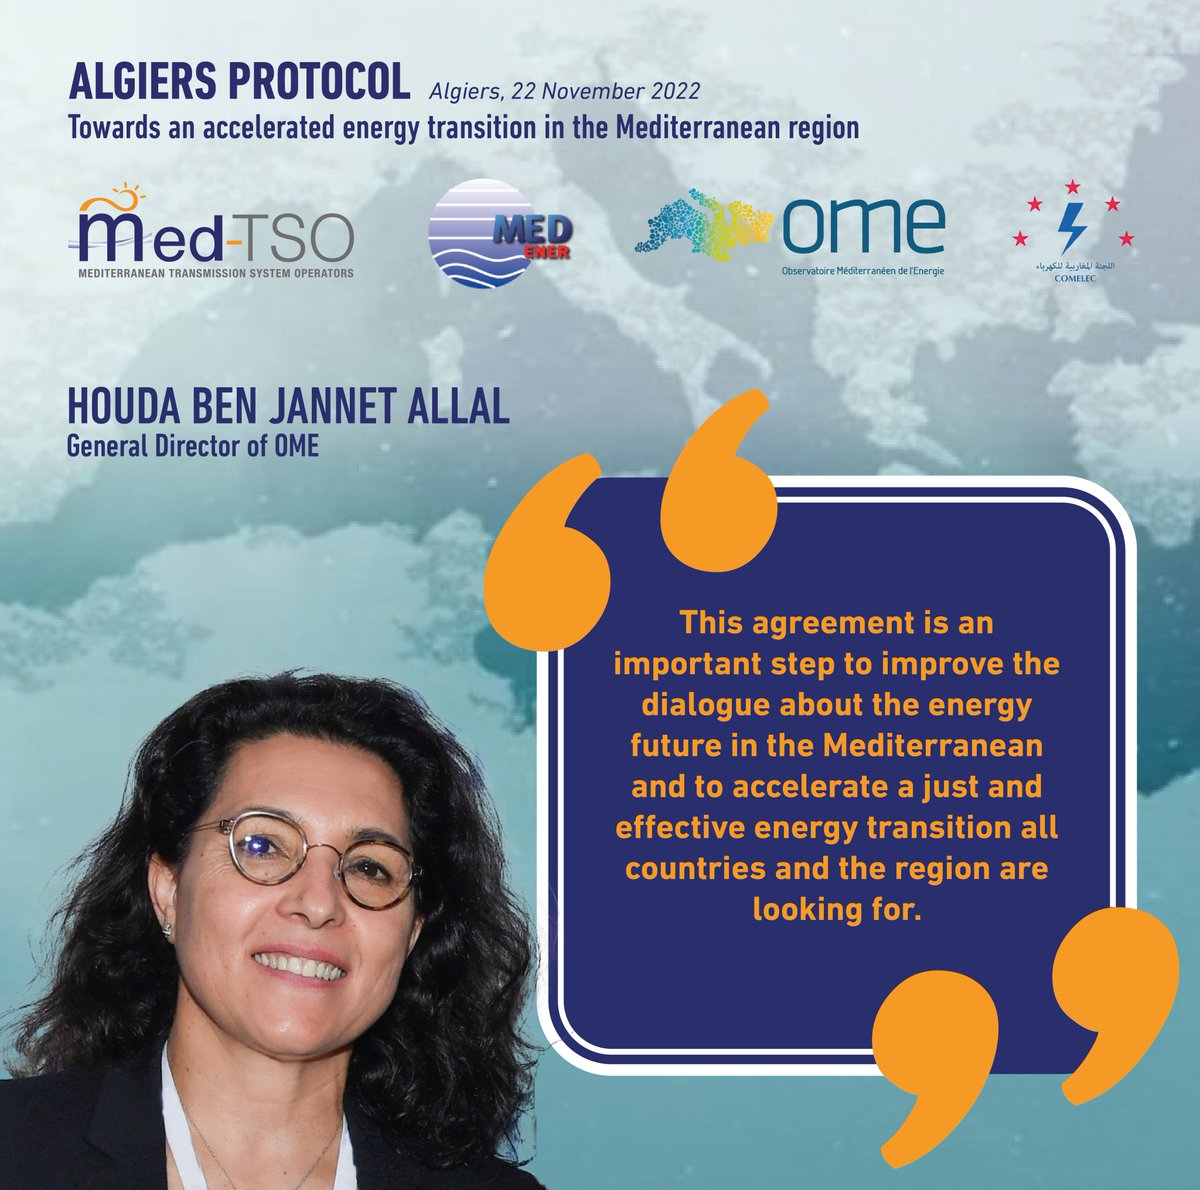 The Algiers Protocol signed by #COMELEC, @ContactMedener #MedTSO, and @OME_cooperation presents a comprehensive approach to sustainability in the #energy sector with a strong commitment to dialogue, #cooperation, enacting networks, and exchanging best practices.

#10YearsOfMedTSO